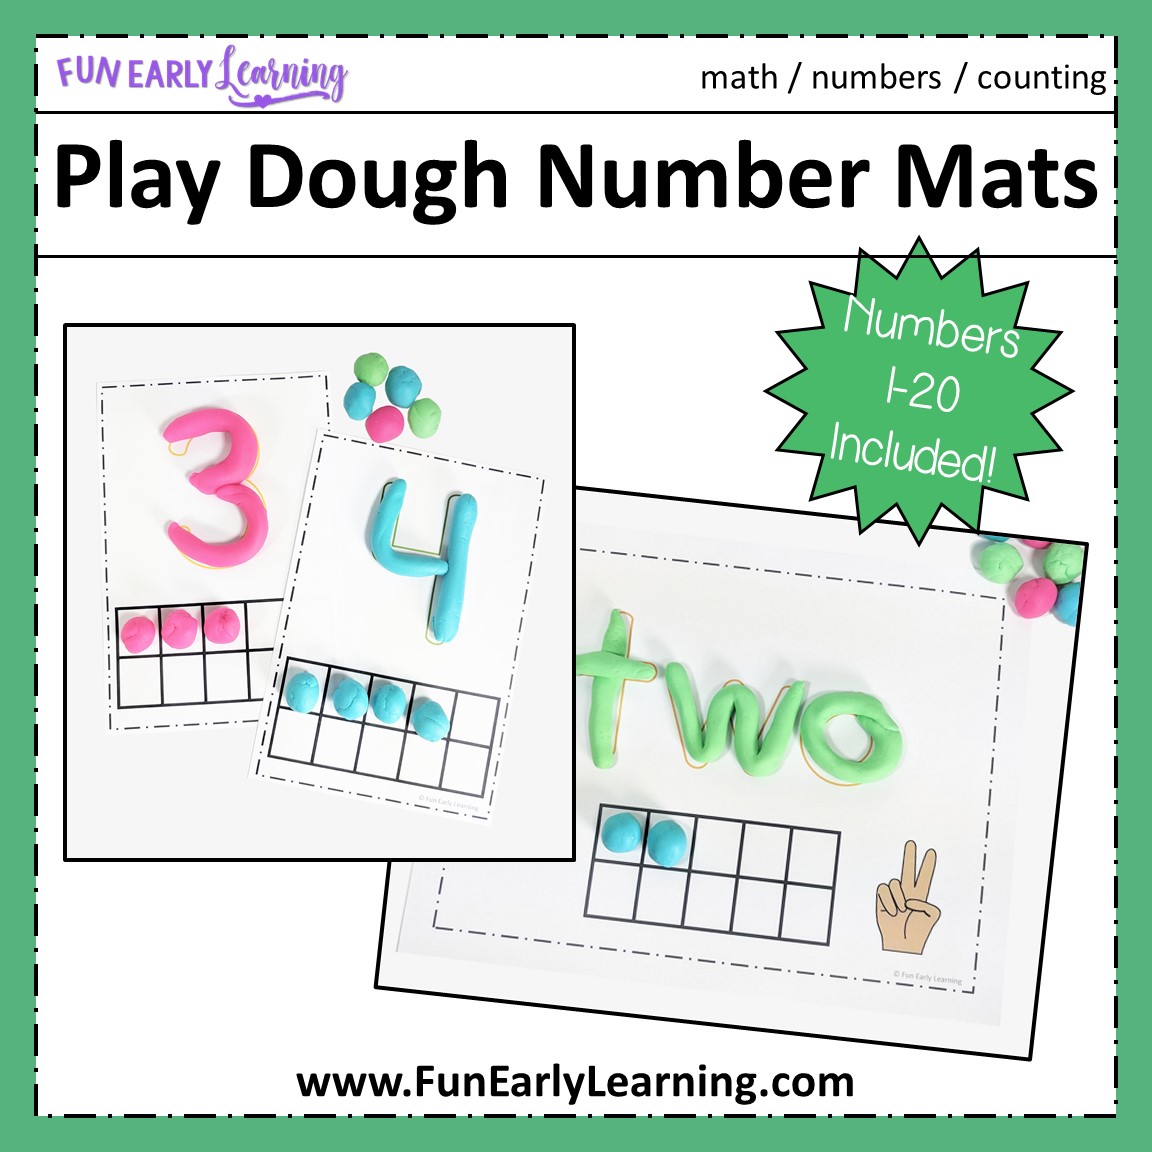 play doh numbers 1 to 10